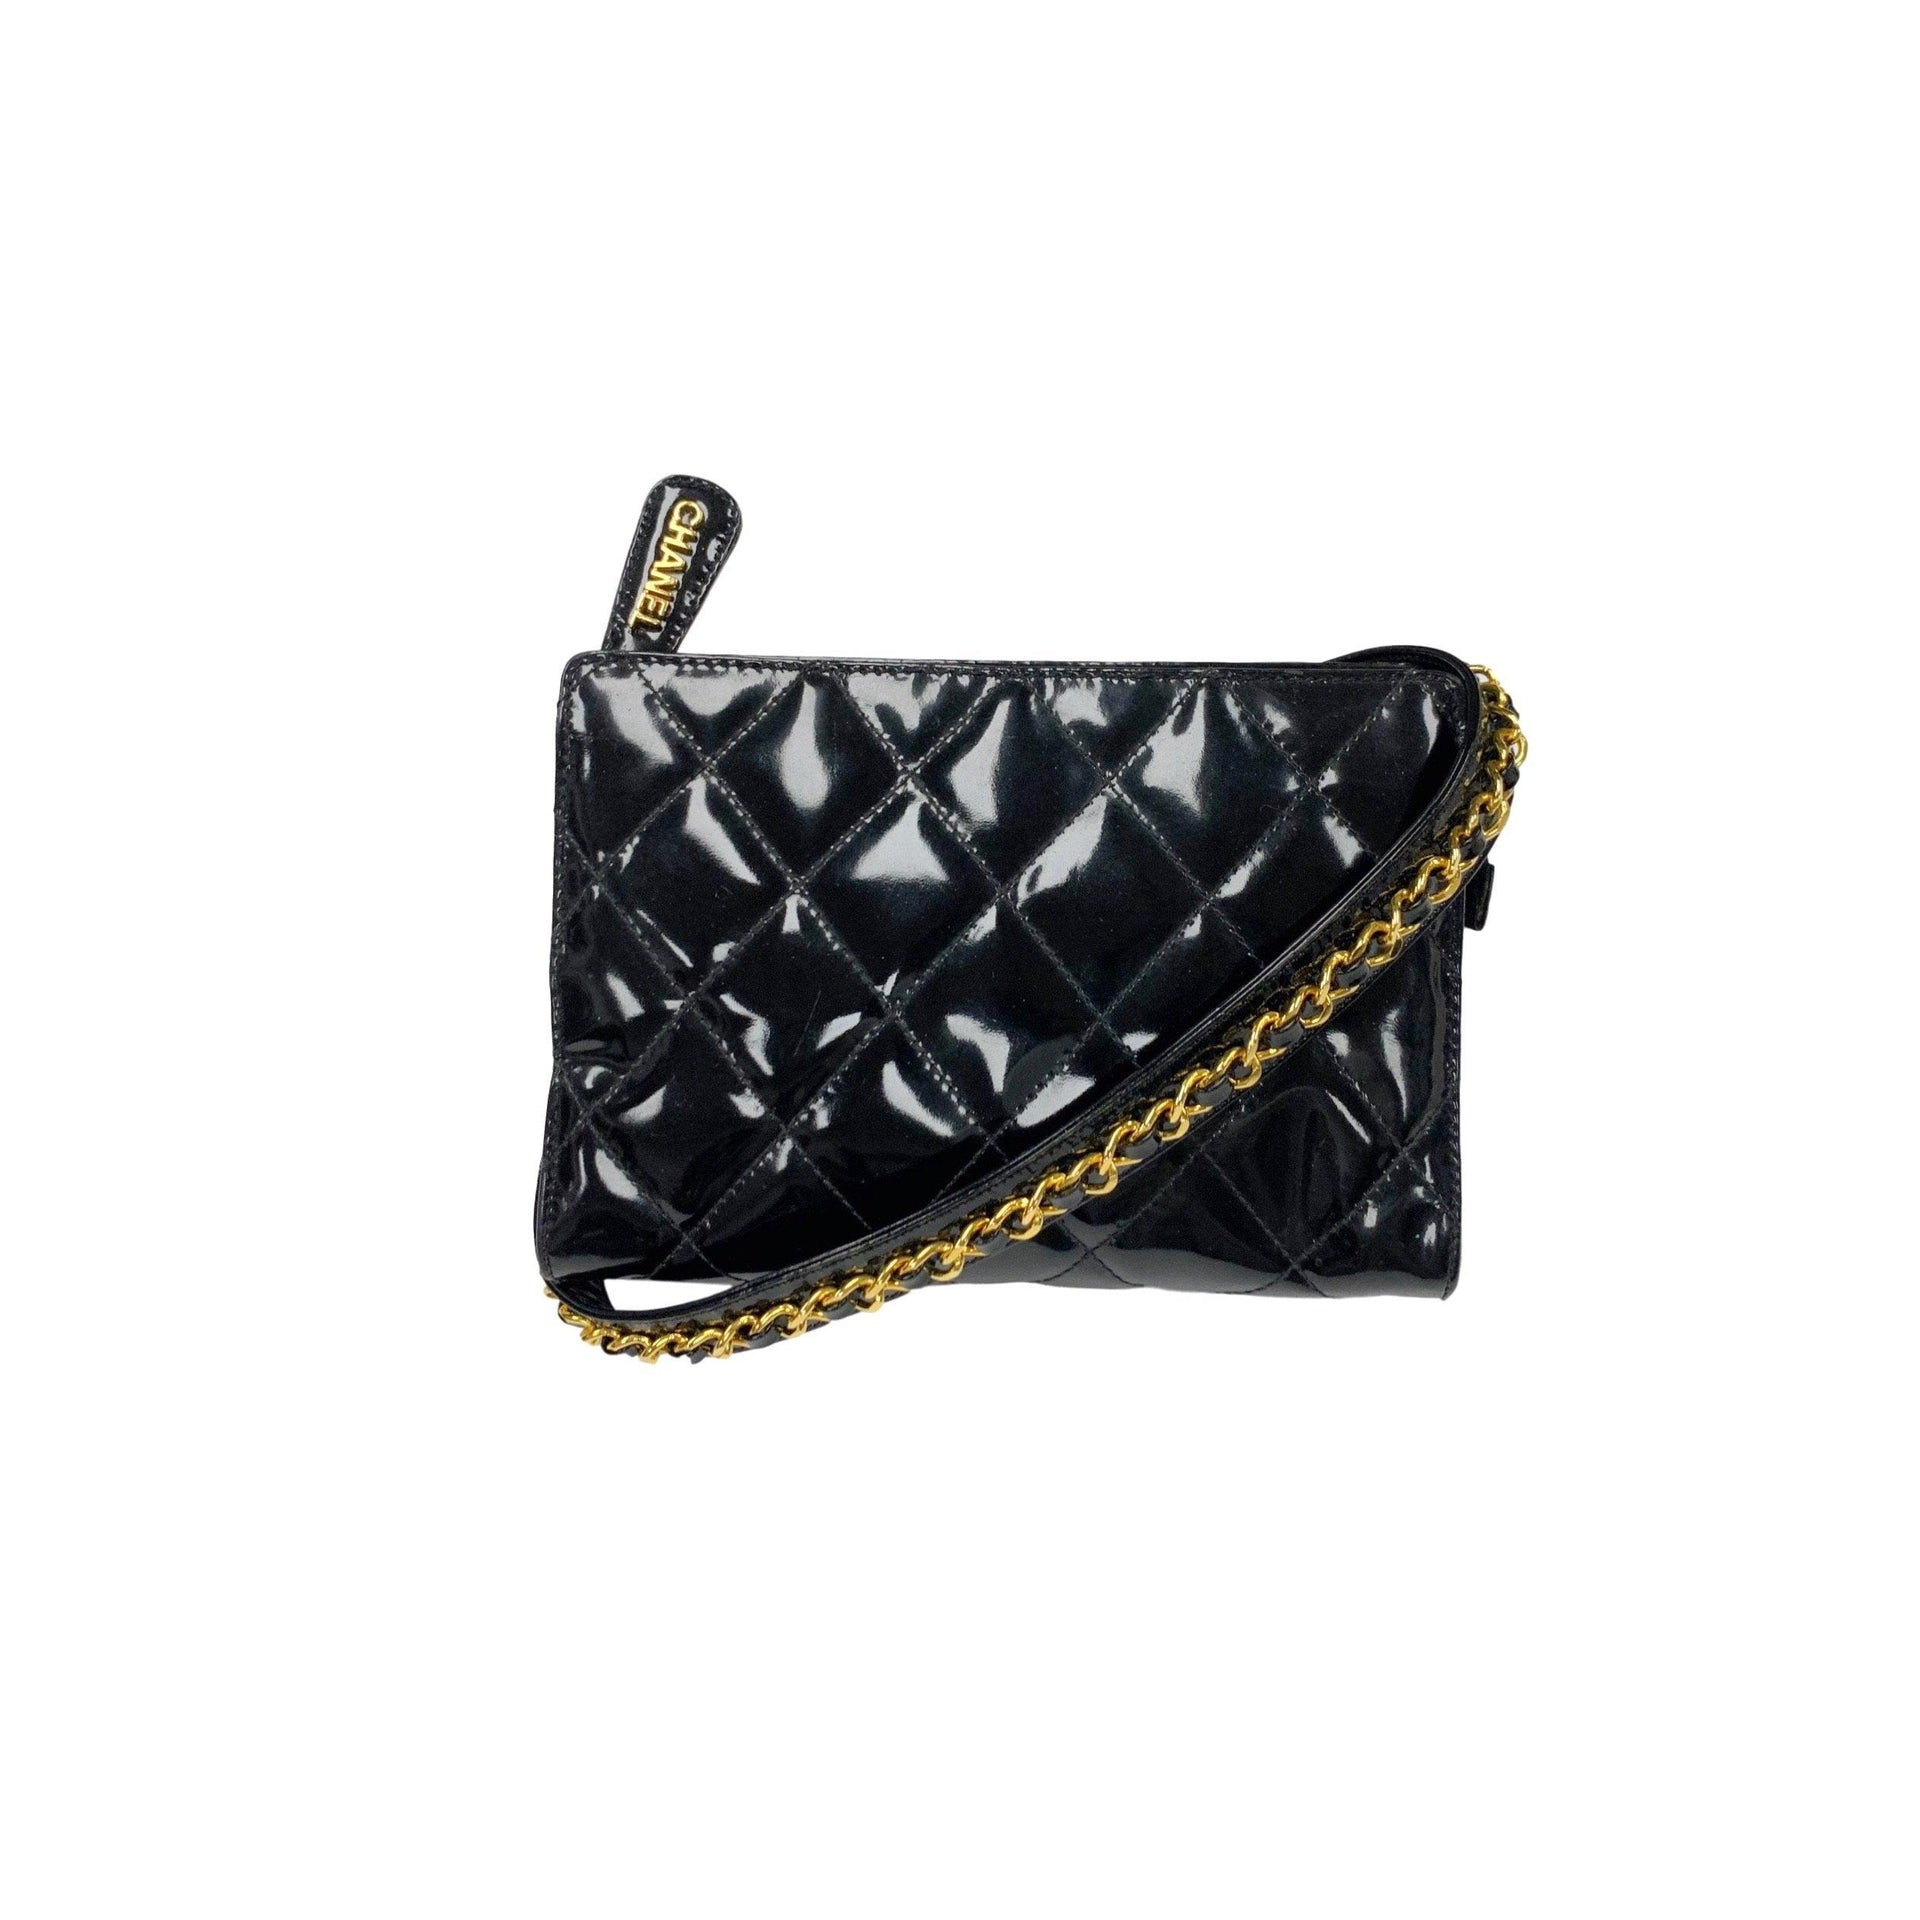 CHANEL Belt Bag & Fanny Pack Black Bags & Handbags for Women, Authenticity  Guaranteed